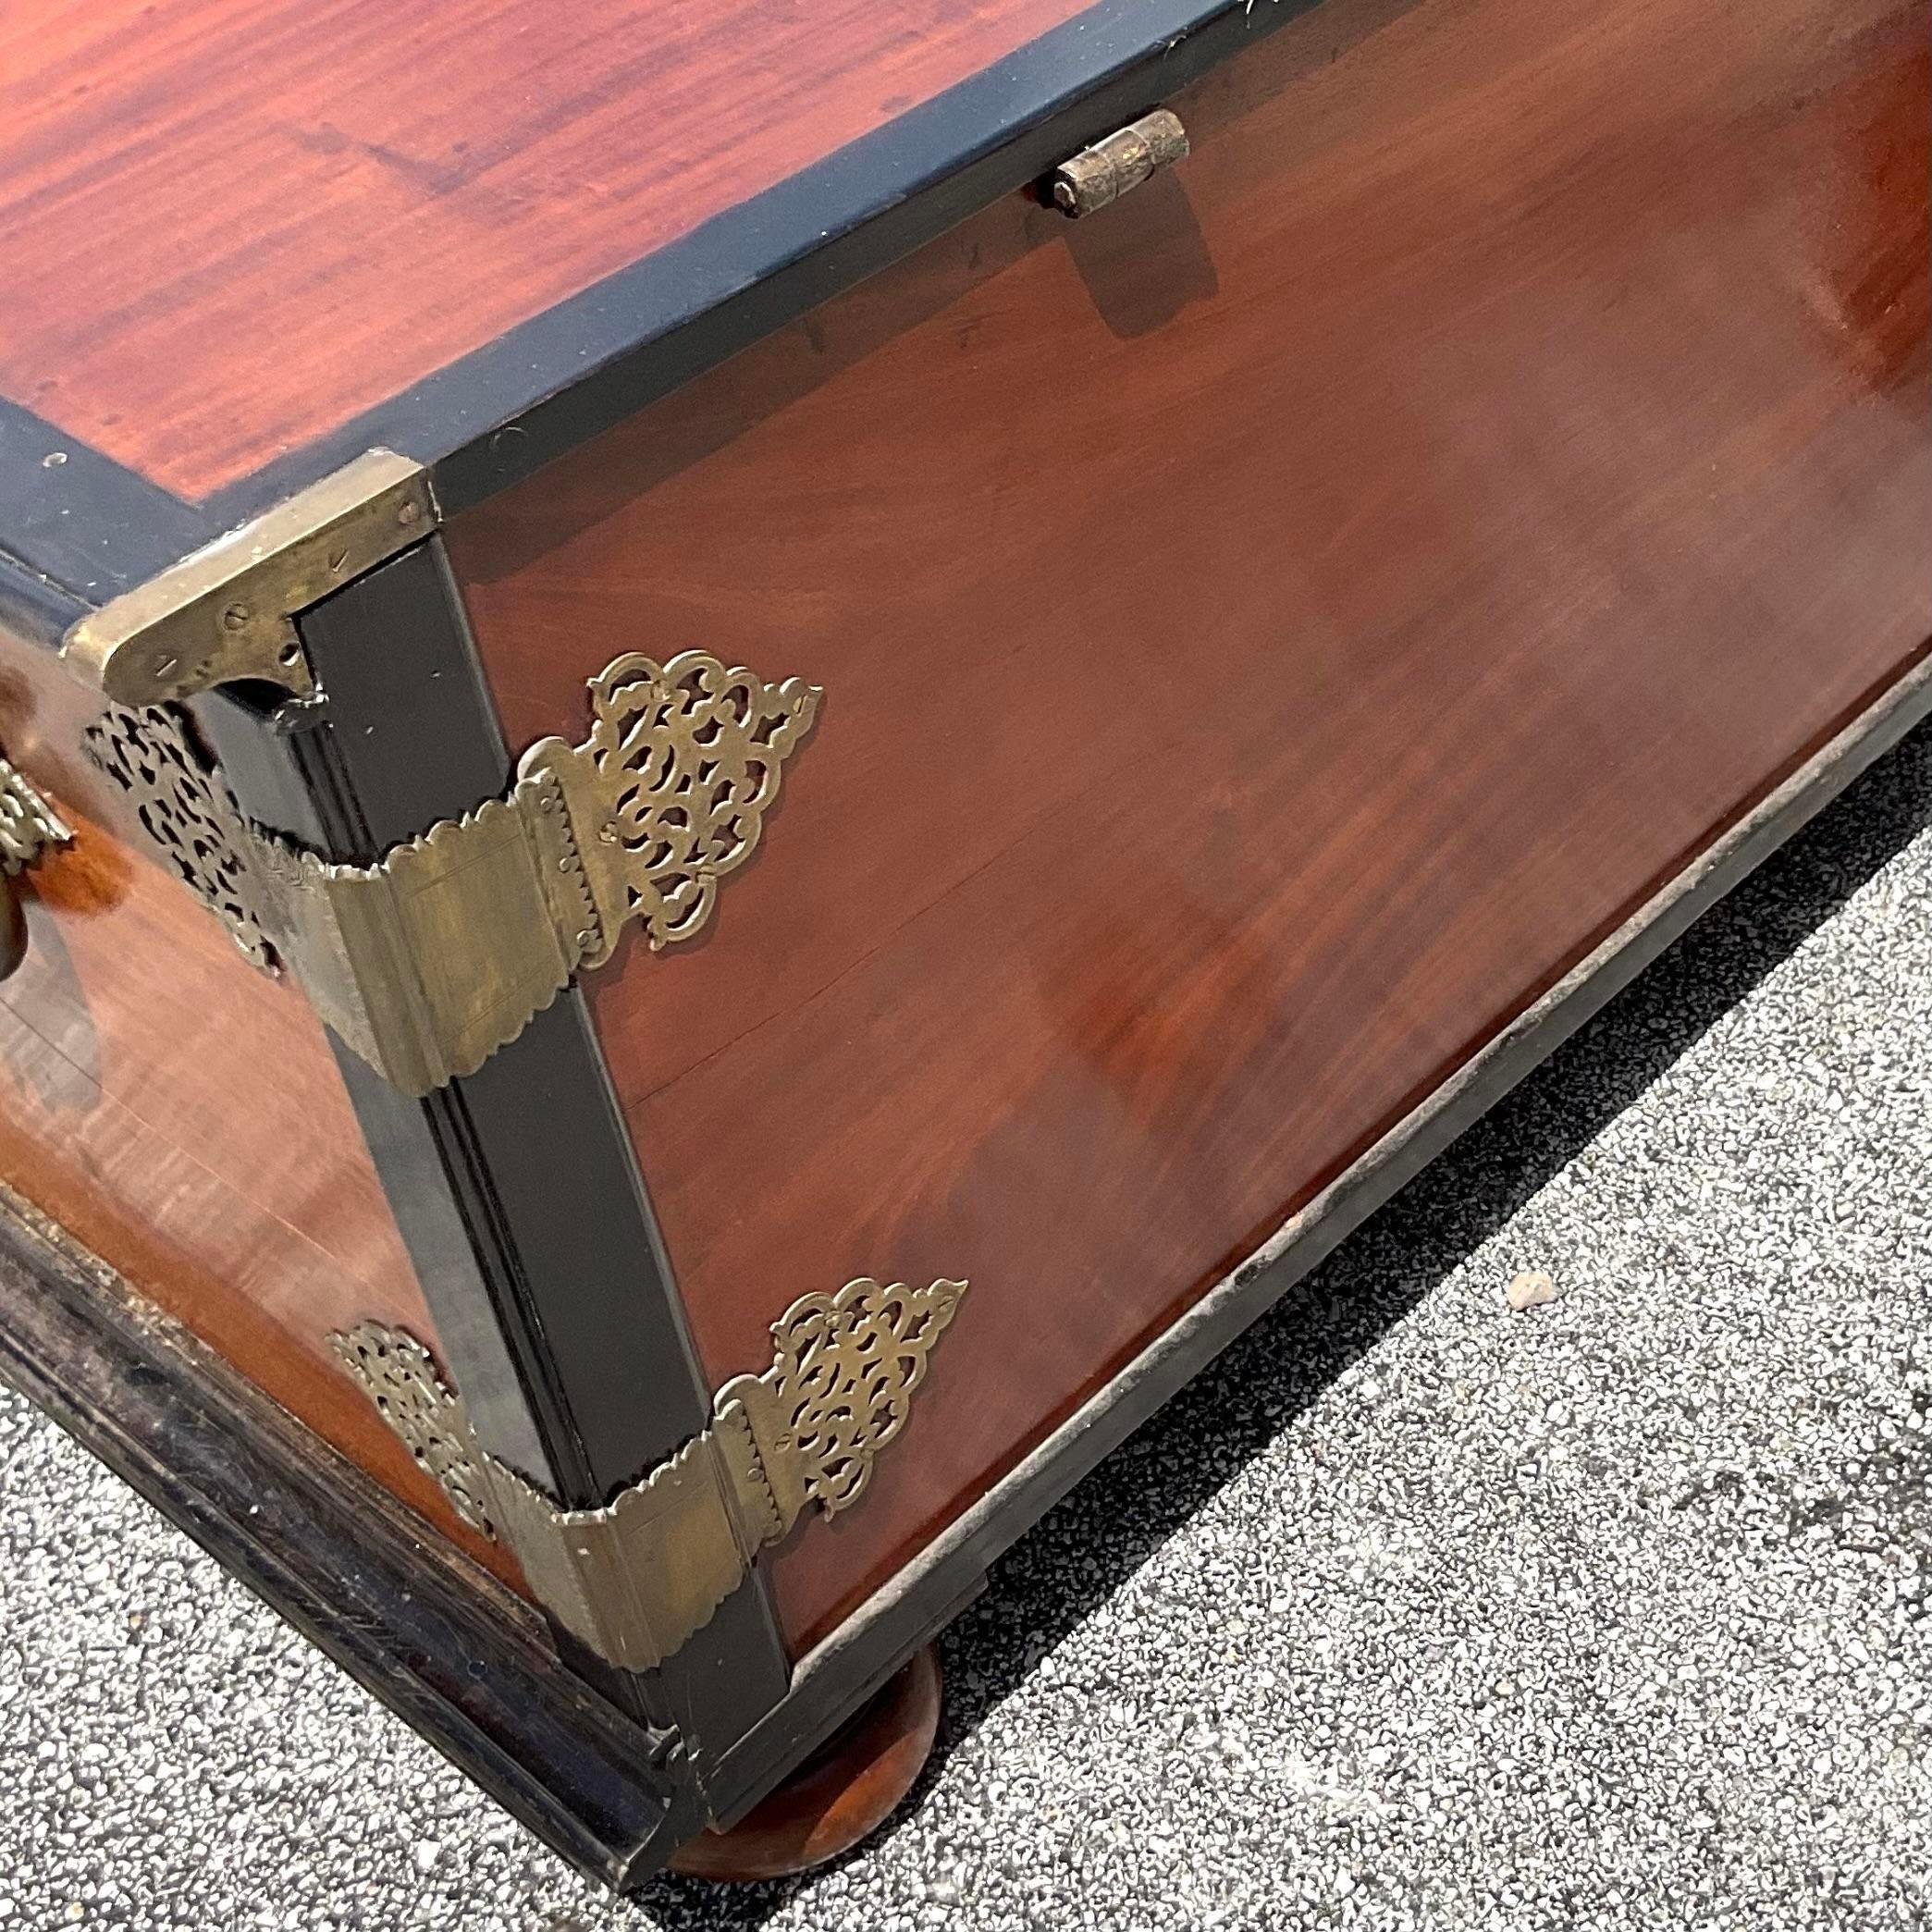 A spectacular vintage Boho blanket chest. Monumental in size and drama. A beautiful ebony and mahogany cabinet with amazing brass hardware. A real showstopper. Acquired from a Palm Beach estate.